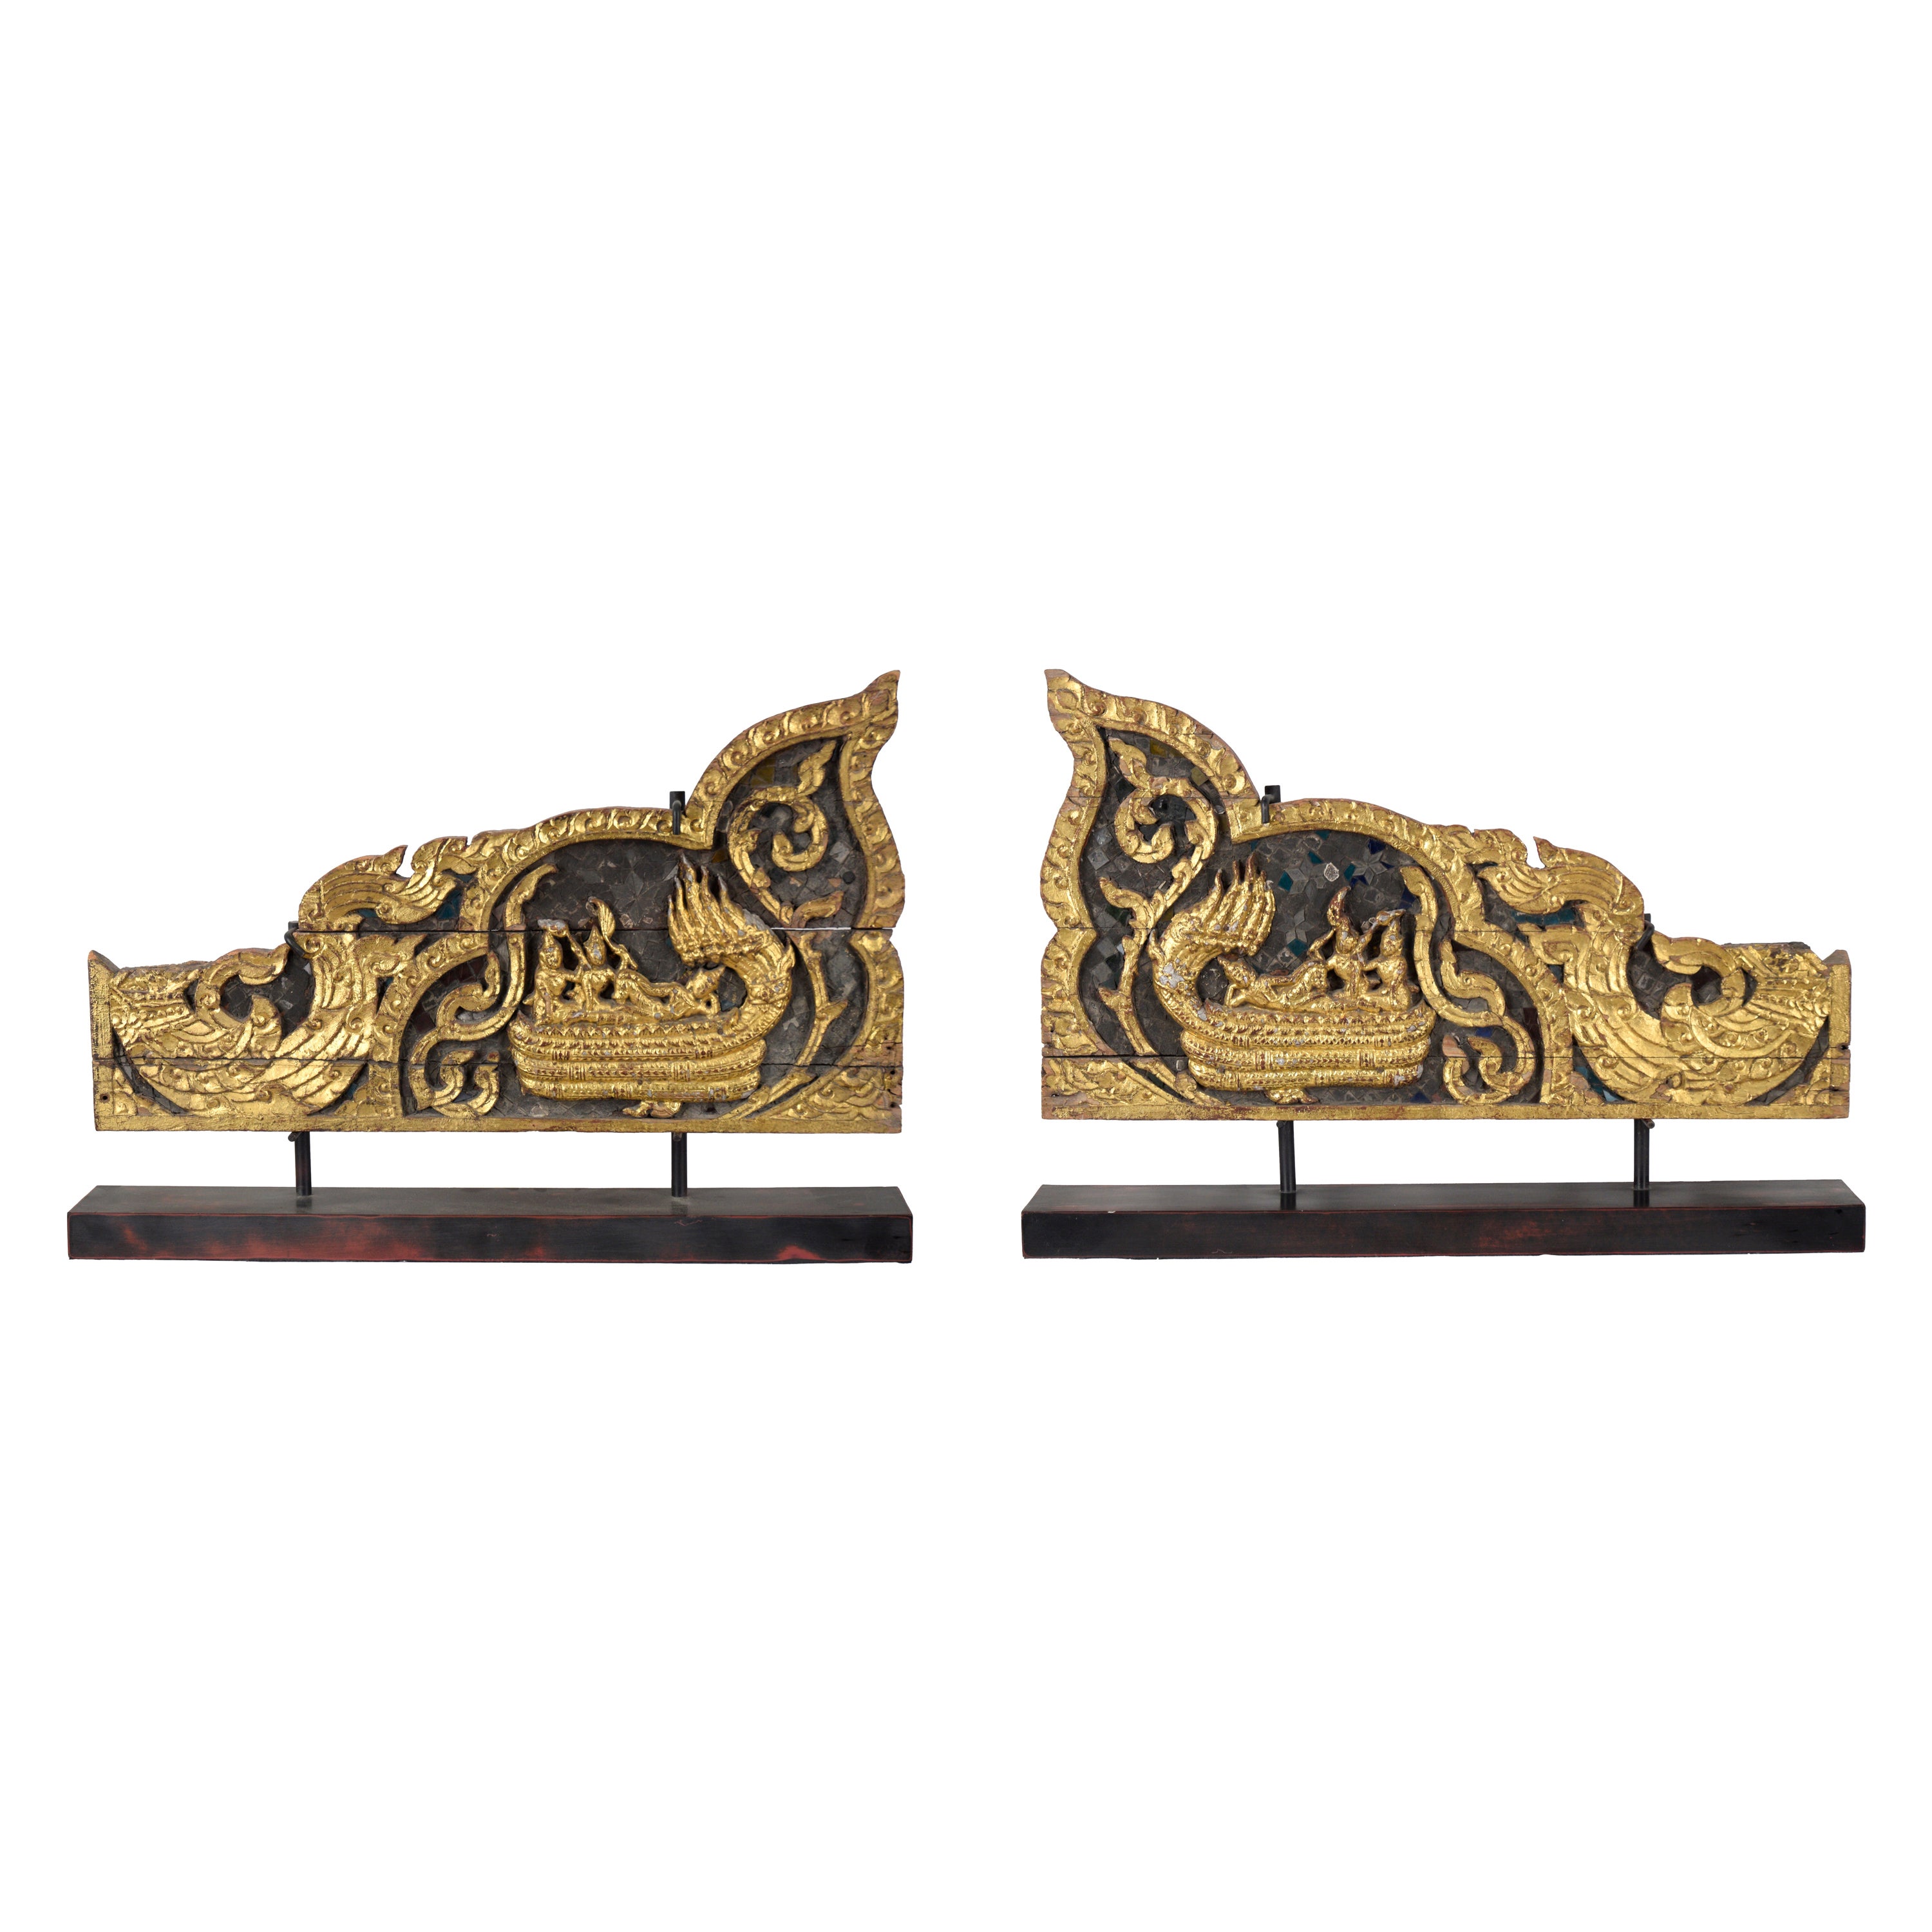 Thai Rattanakosin-Era Carved and Gilded Throne Side Panels (pair) For Sale